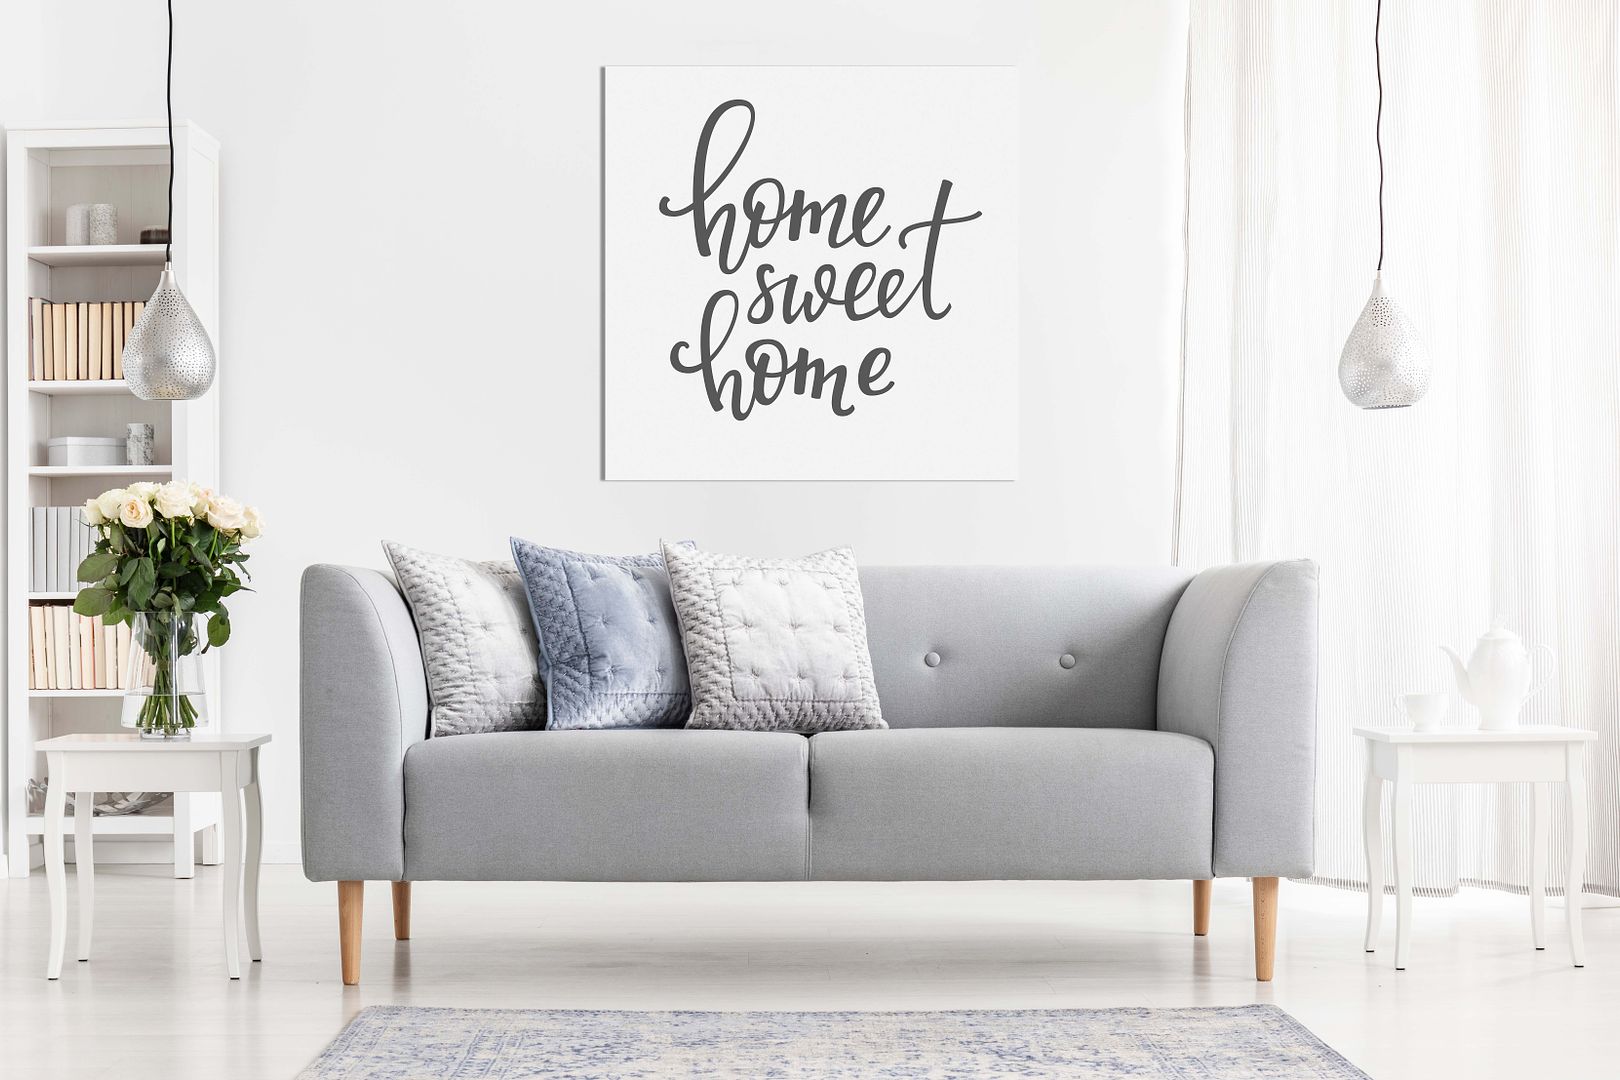 Home Sweet Home Wall Decor Canvas Wall Art Picture Print | eBay